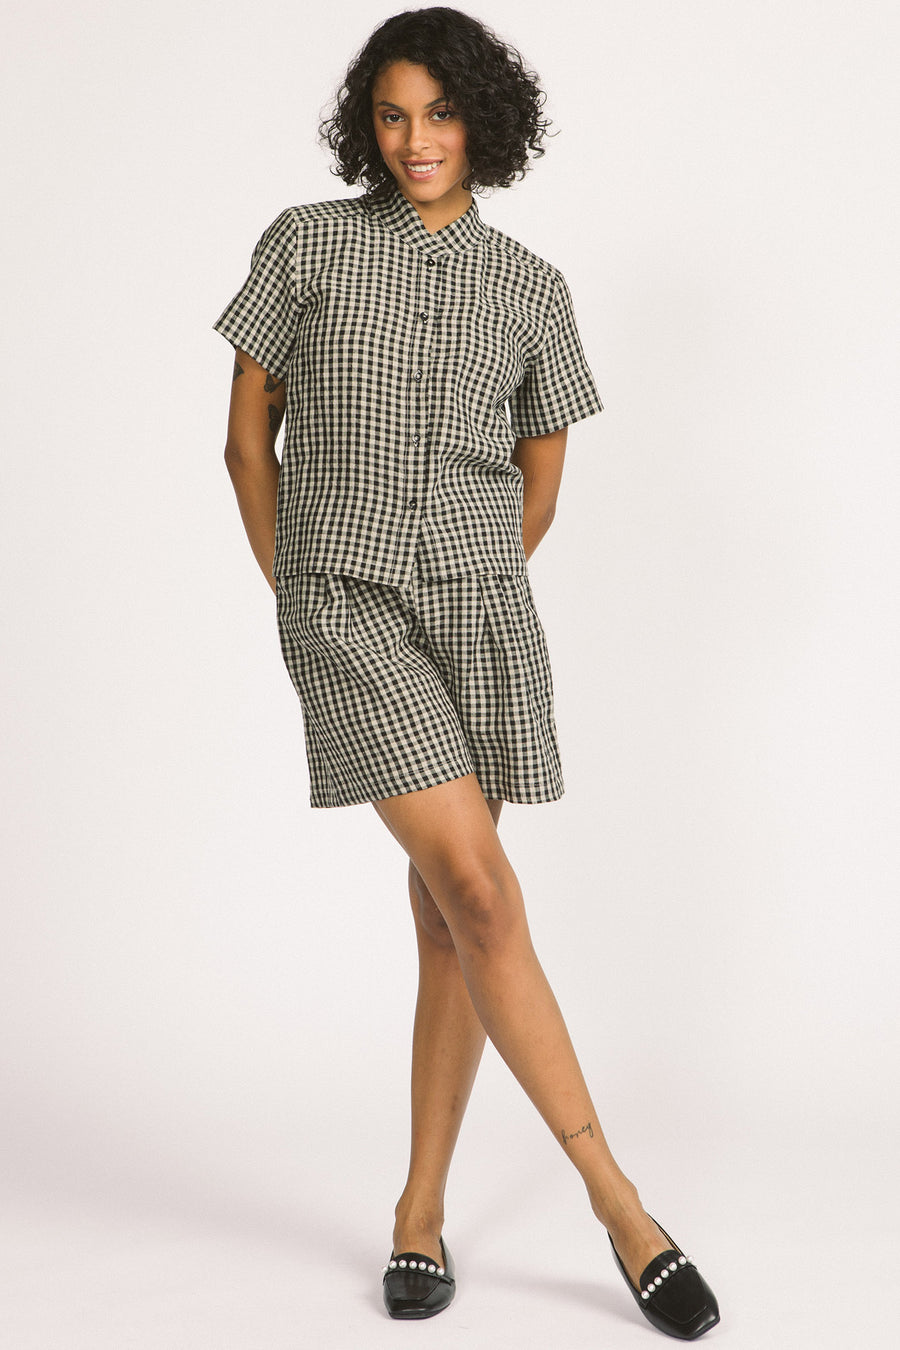 Woman wearing a black and white linen gingham button up Elodie blouse by Allison Wonderland. 